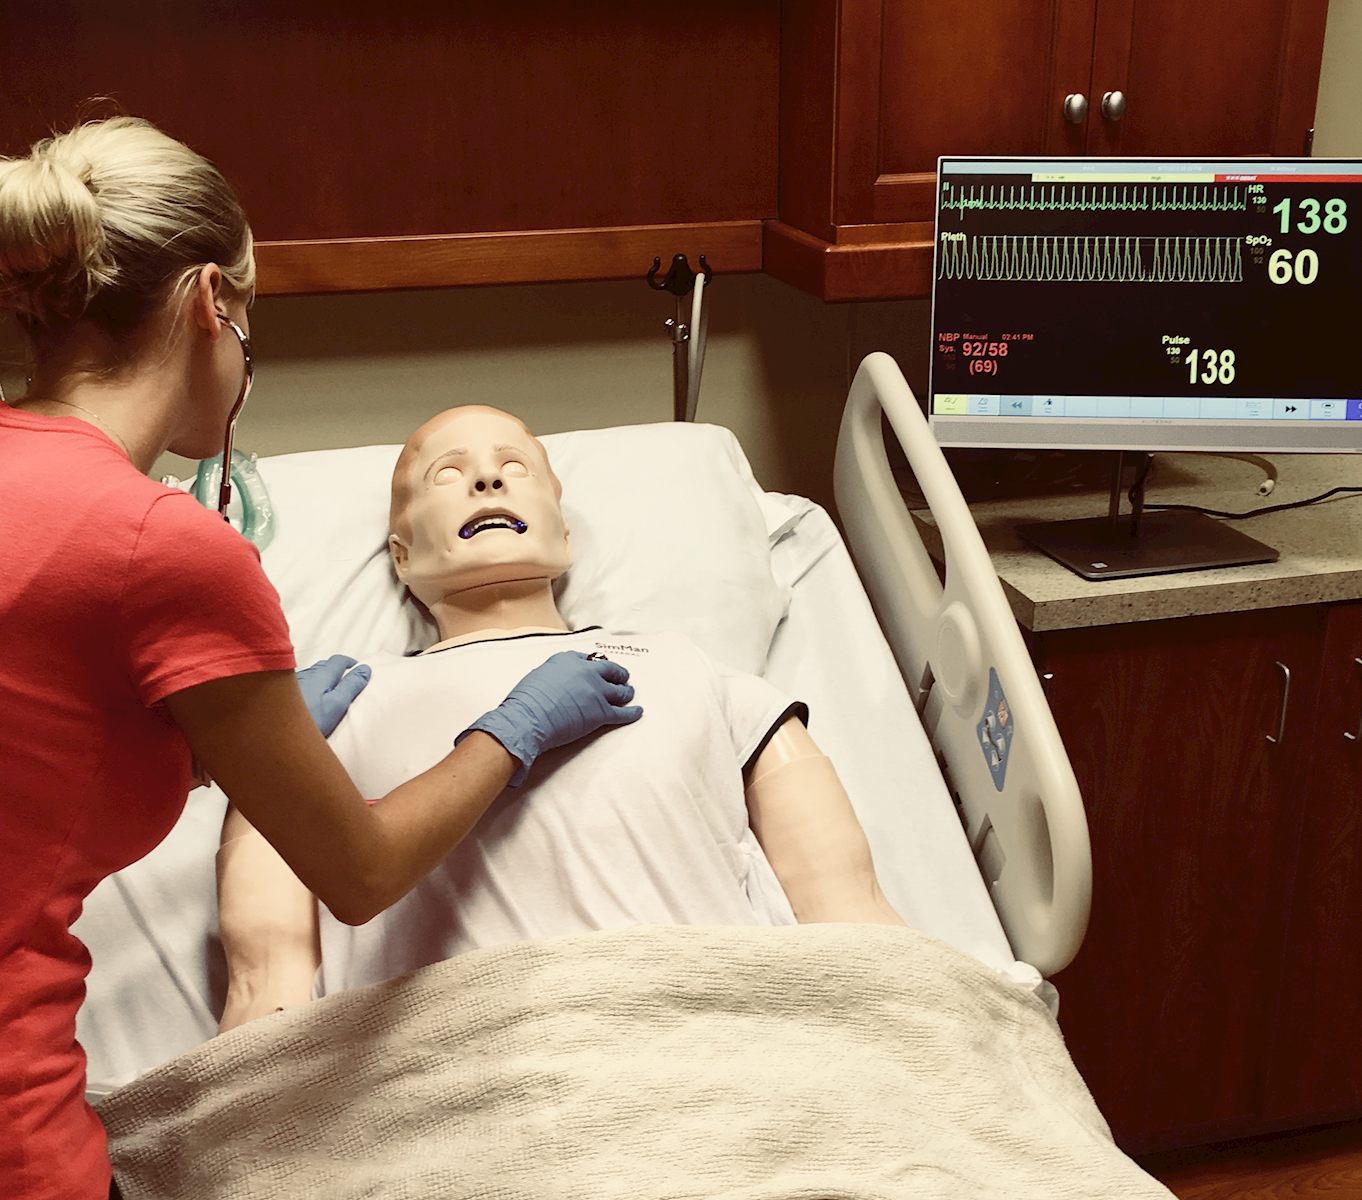 Health Career Simulation: Learn and Experience